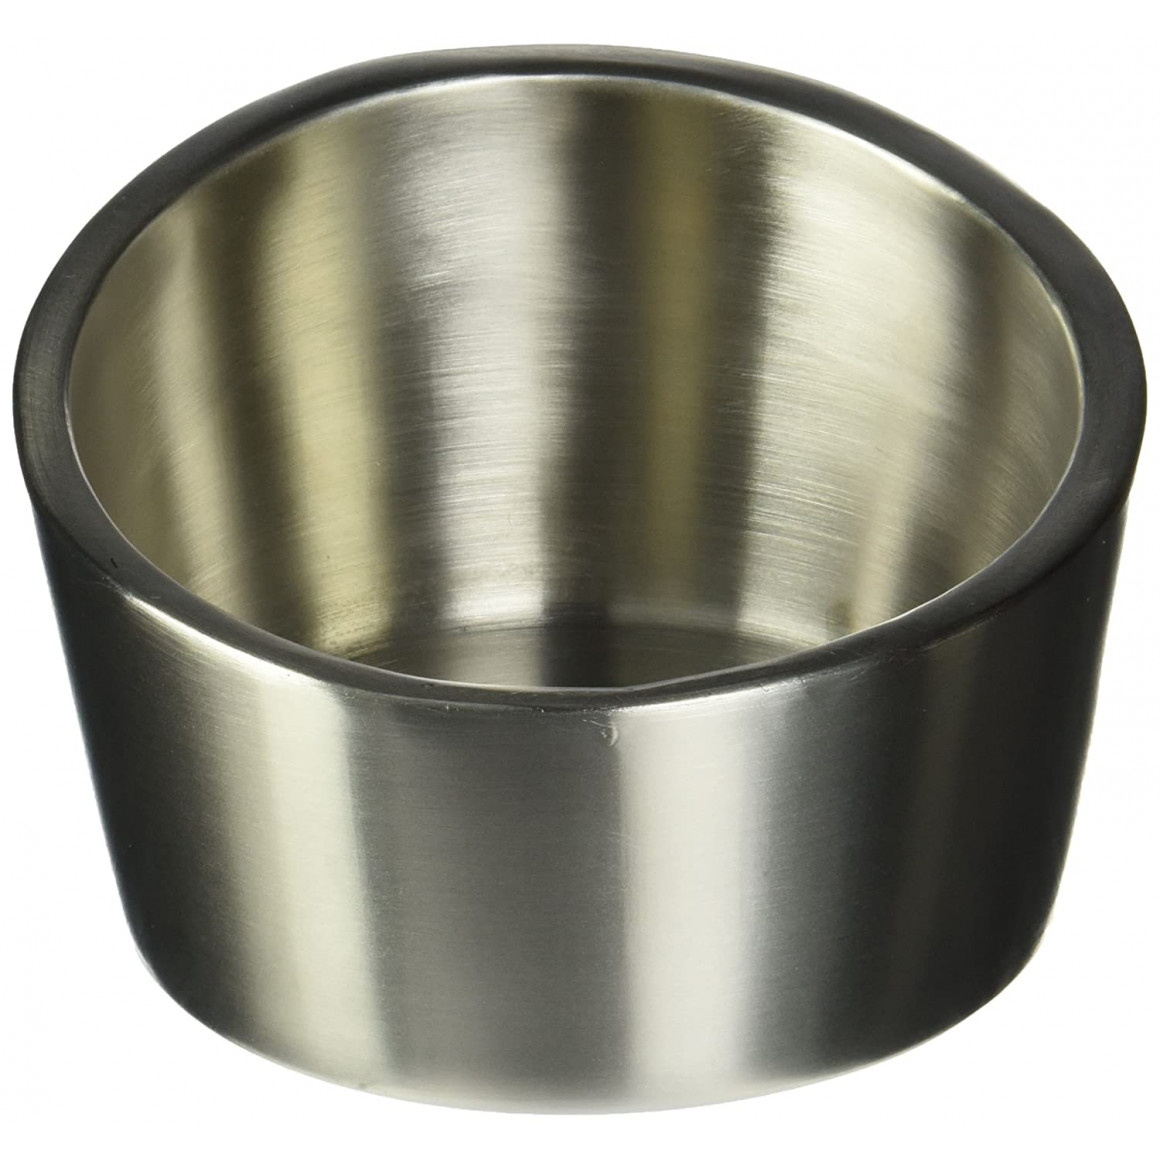 STAINLESS STEEL, SATIN BOWL, DOUBLE WALL, SCR 34 OZ.